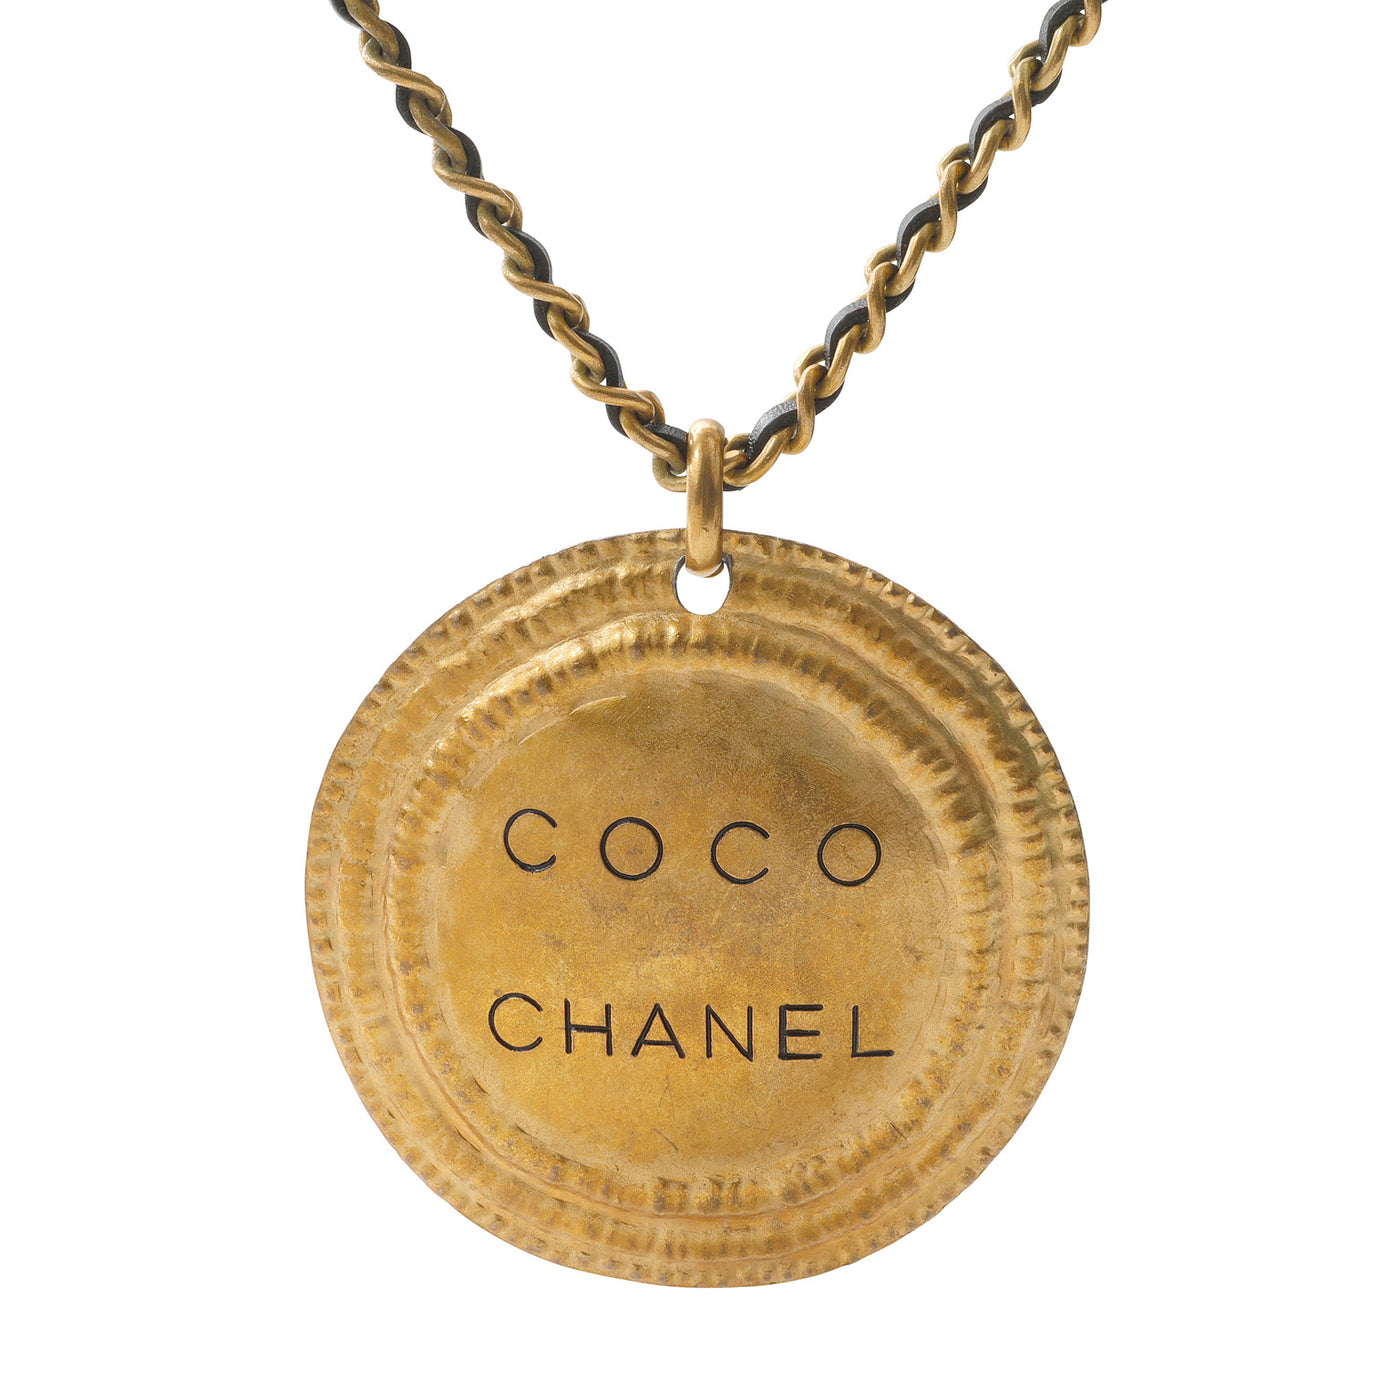 Chanel Large Gold Coco Runway Medallion Necklace